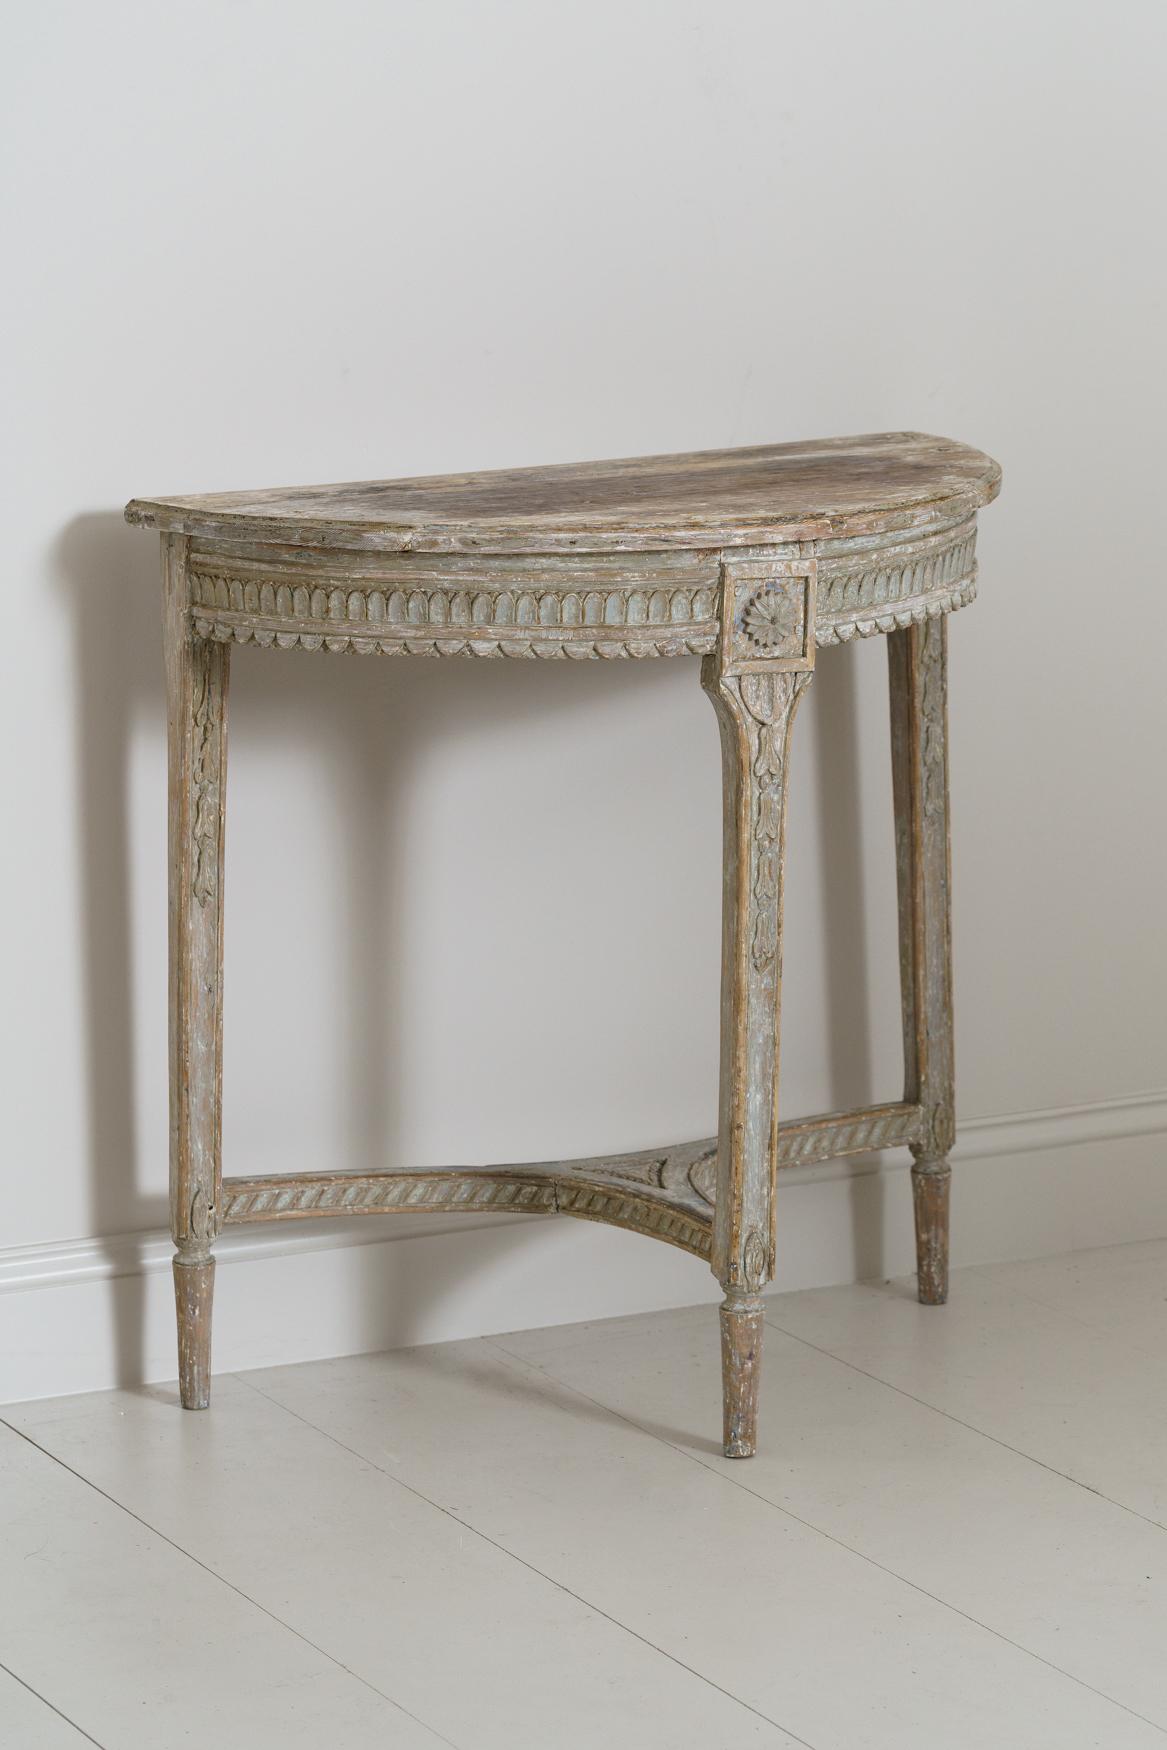 A Swedish Gustavian period demilune table in original blue paint from the 18th century. The apron has egg and dart detail along the top with scalloped detail below. Cascading bell flowers on each leg below carved rosettes.